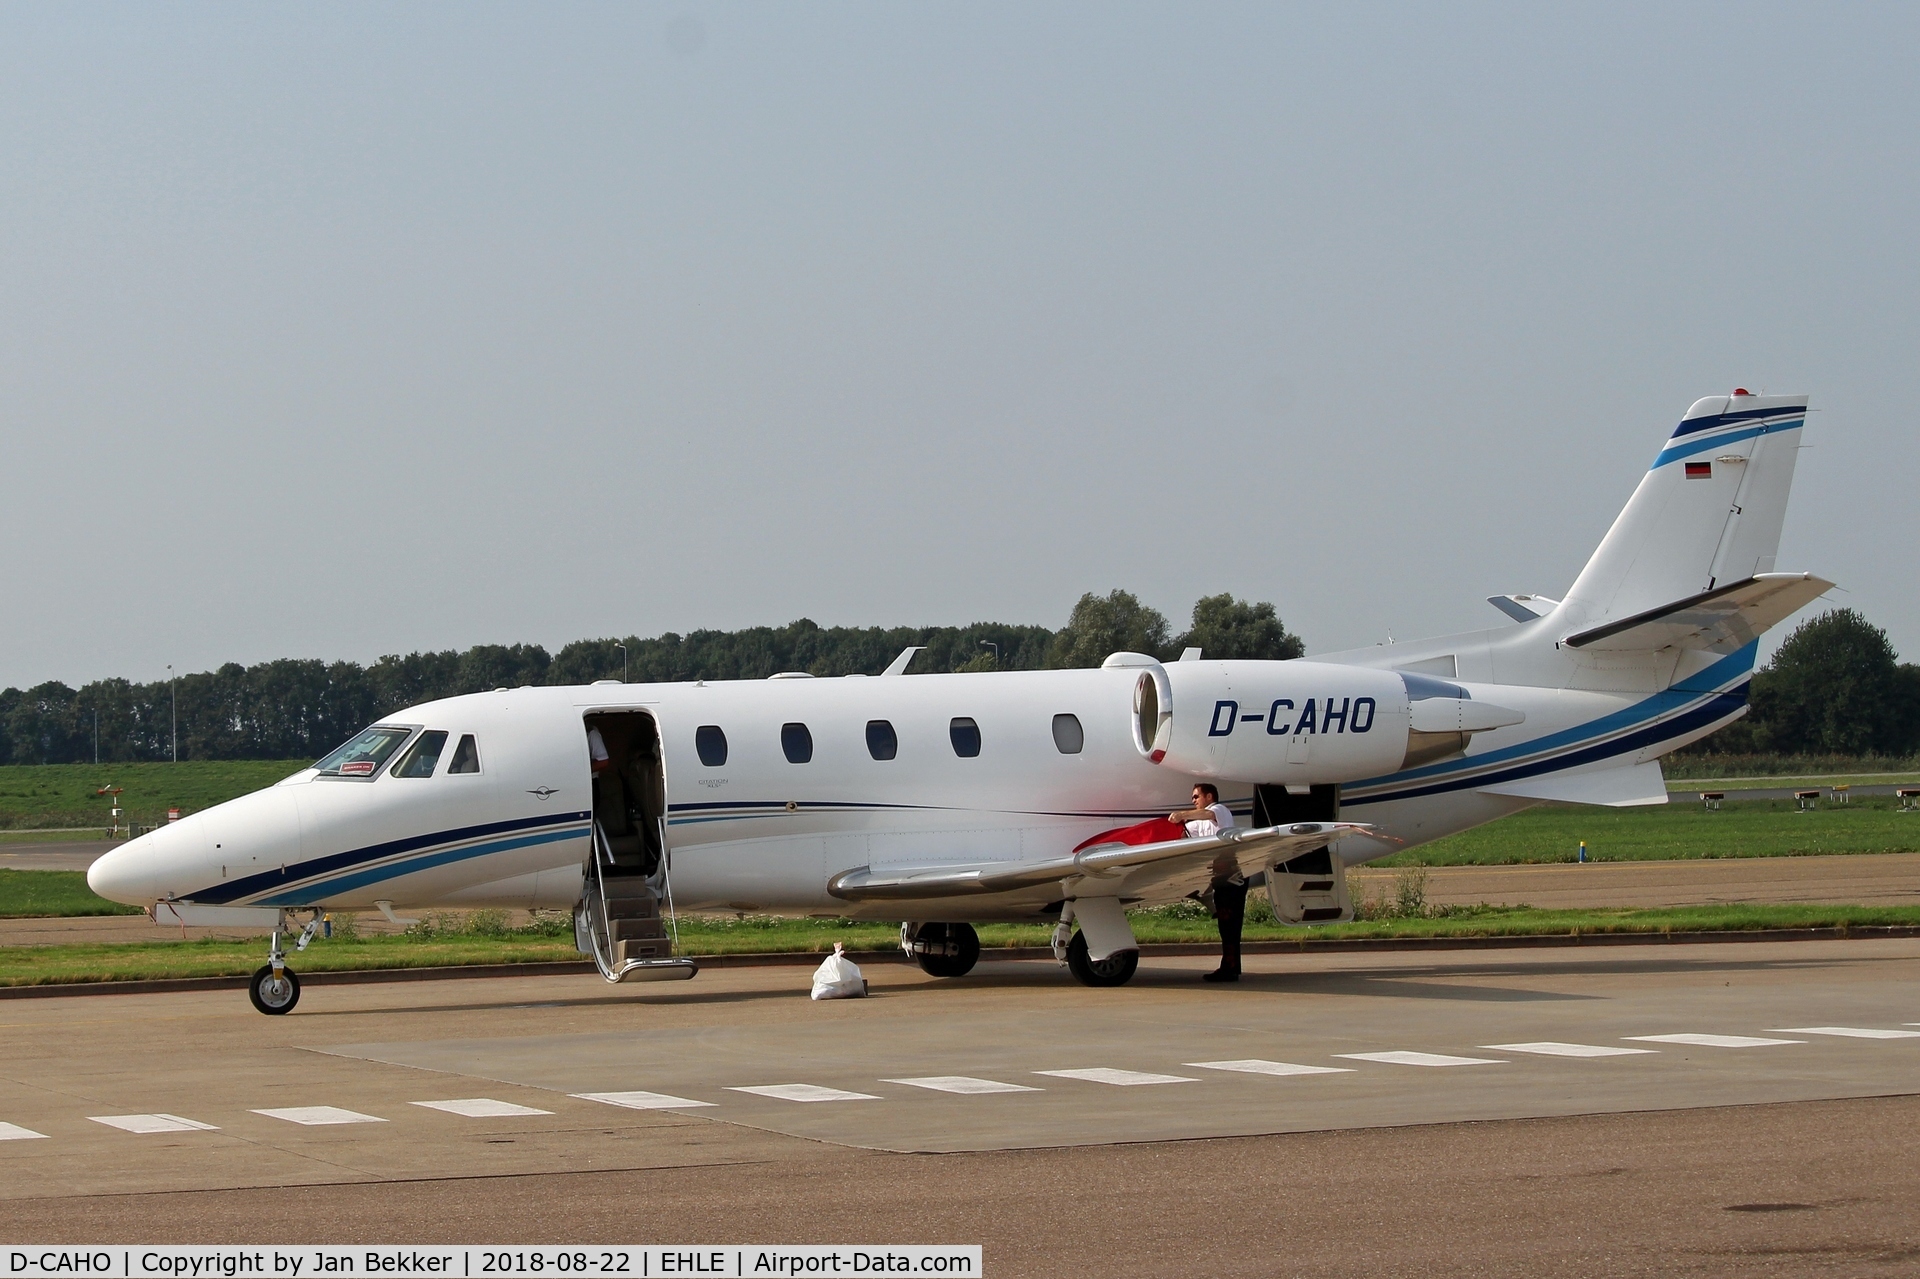 D-CAHO, 2014 Cessna 560 Citation Excel XLS+ C/N 560-6165, Lelystad Airport. Putting on th engine protectors